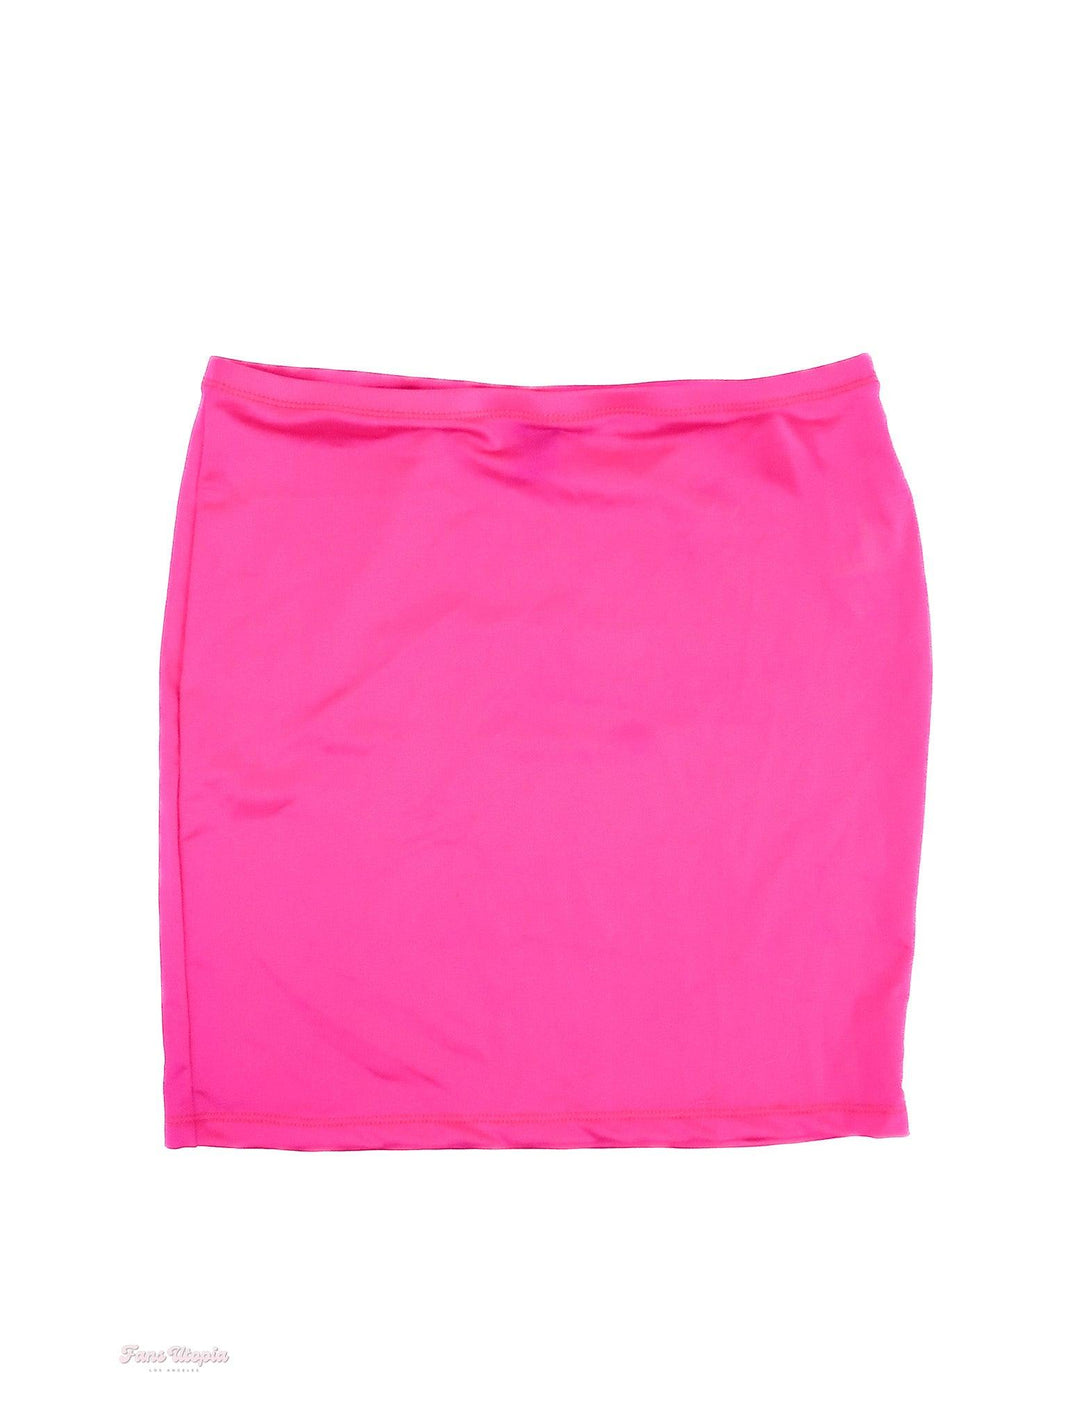 Anna Claire Clouds Hot Pink Mini Skirt - FANS UTOPIA